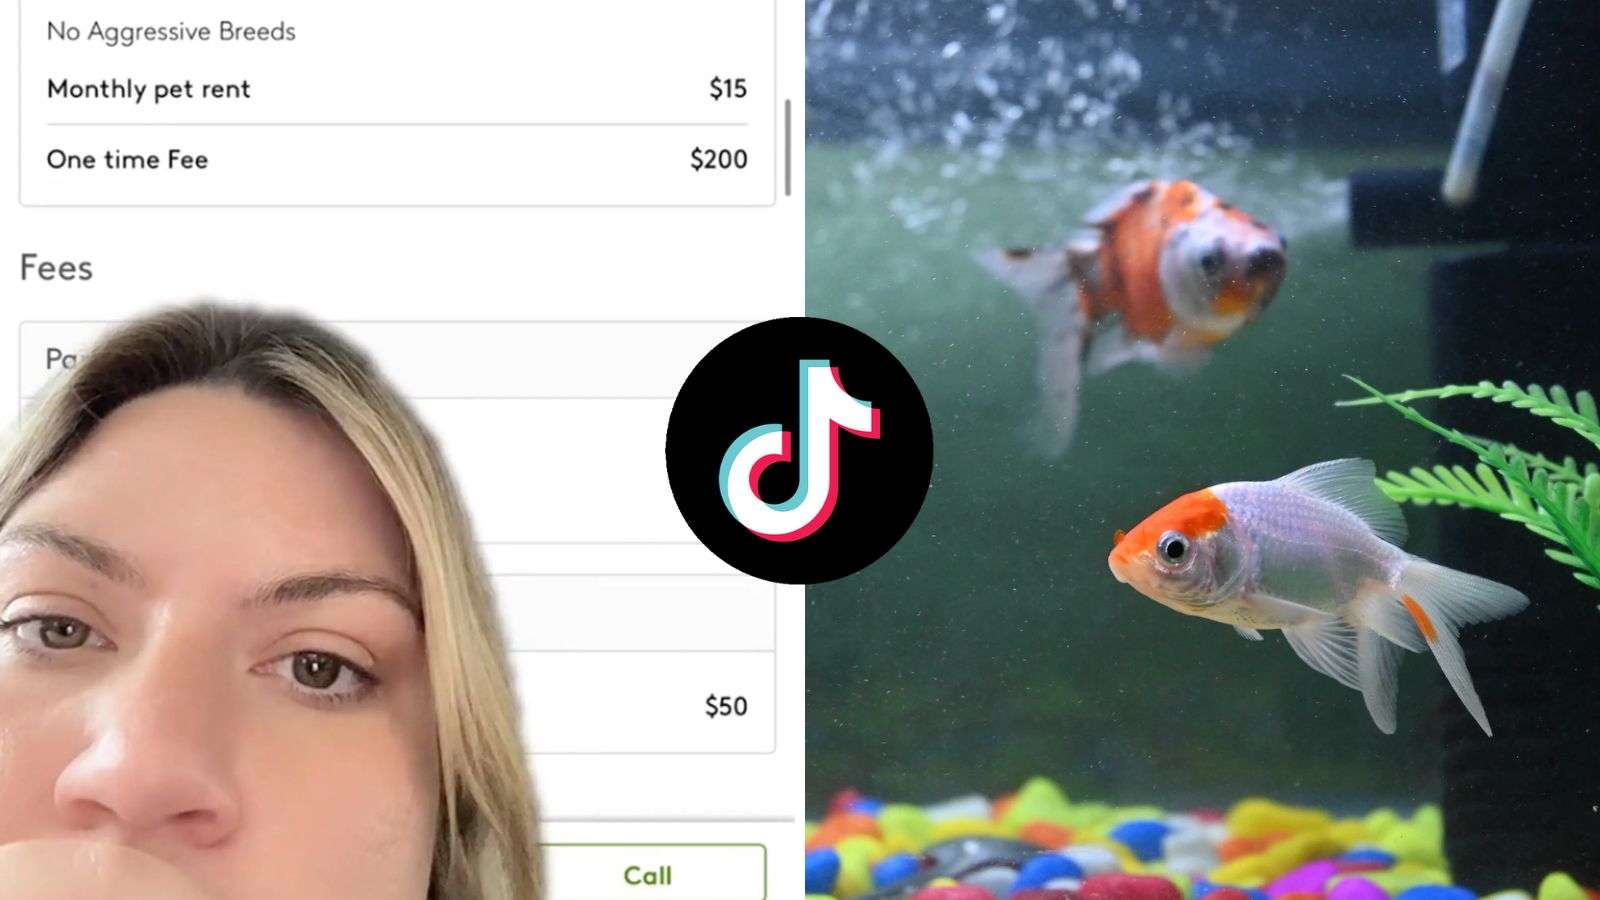 Woman stunned as landlord charges $200 fee and rent for pet fish